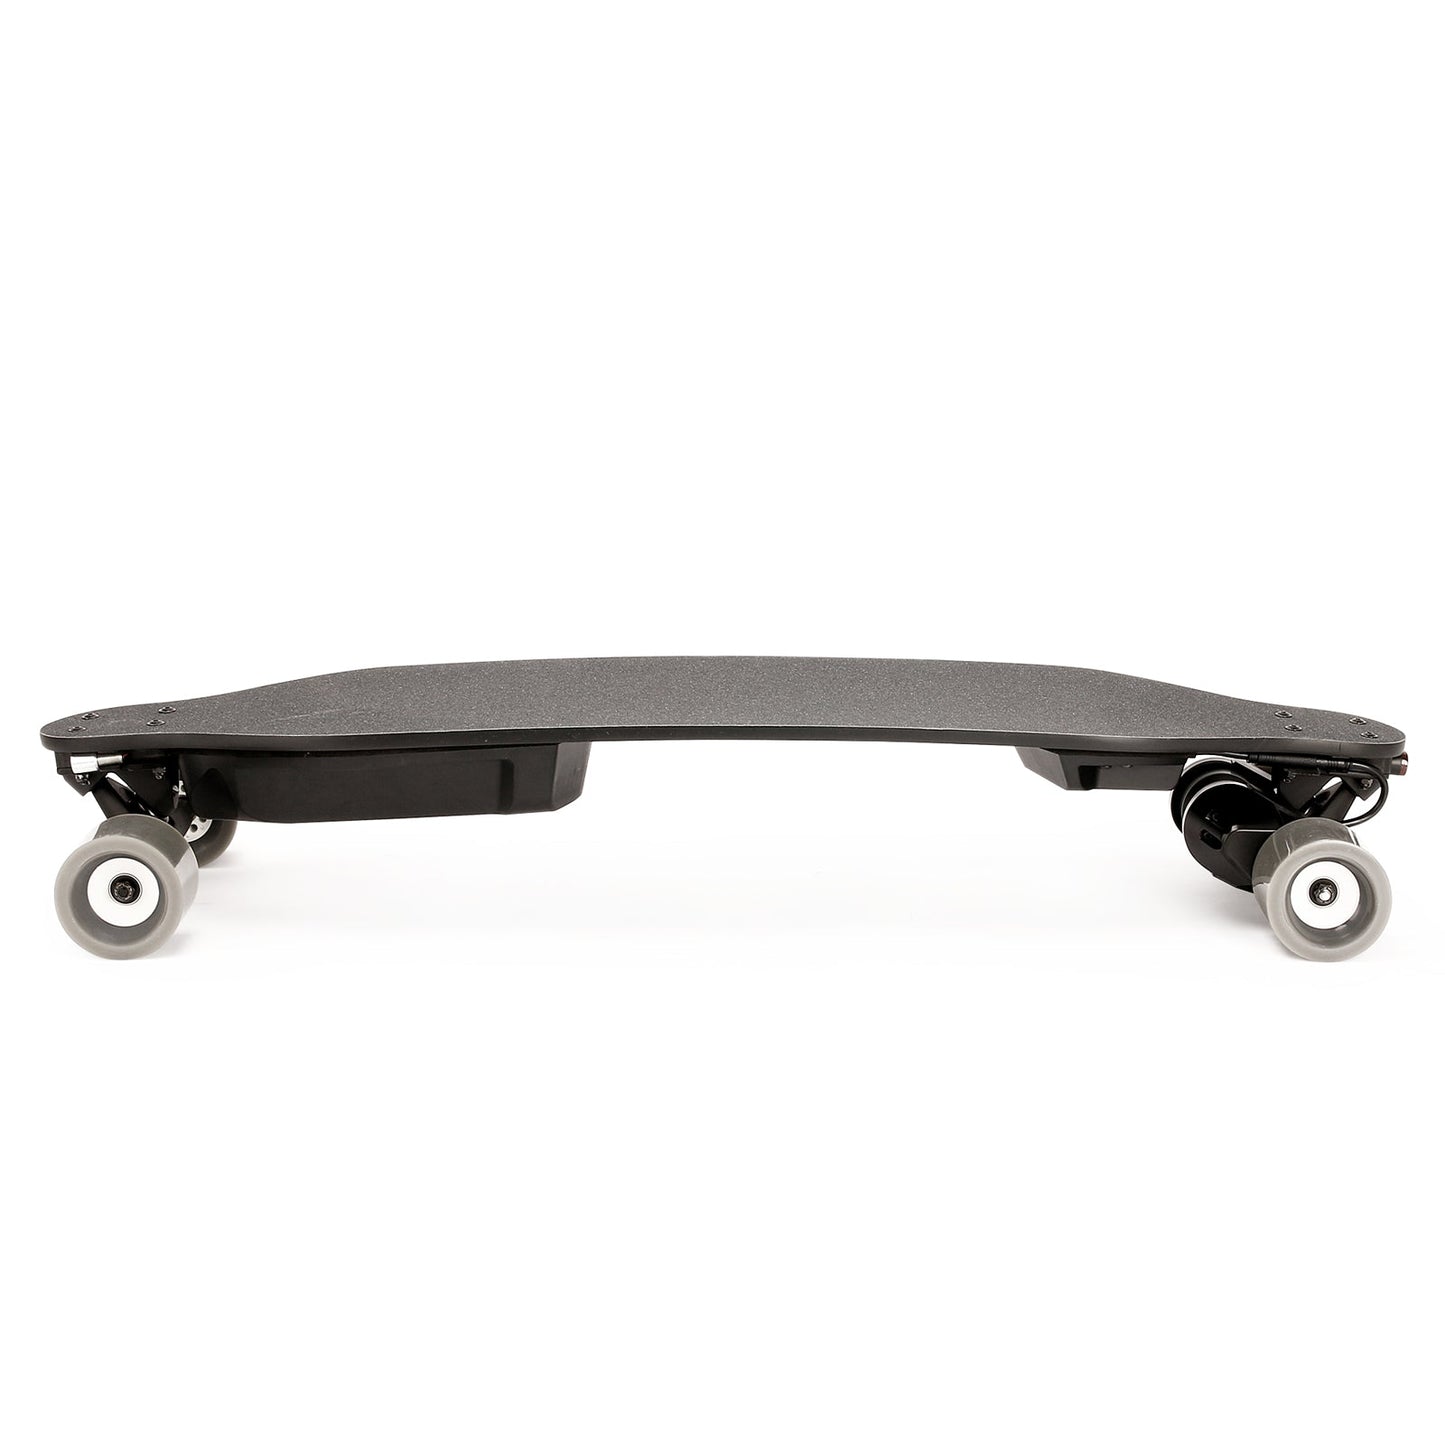 FAST & FURIOUS Electric Skateboard 600W dual belt motors with remote control top speed 25MPH, 19 miles range longboard